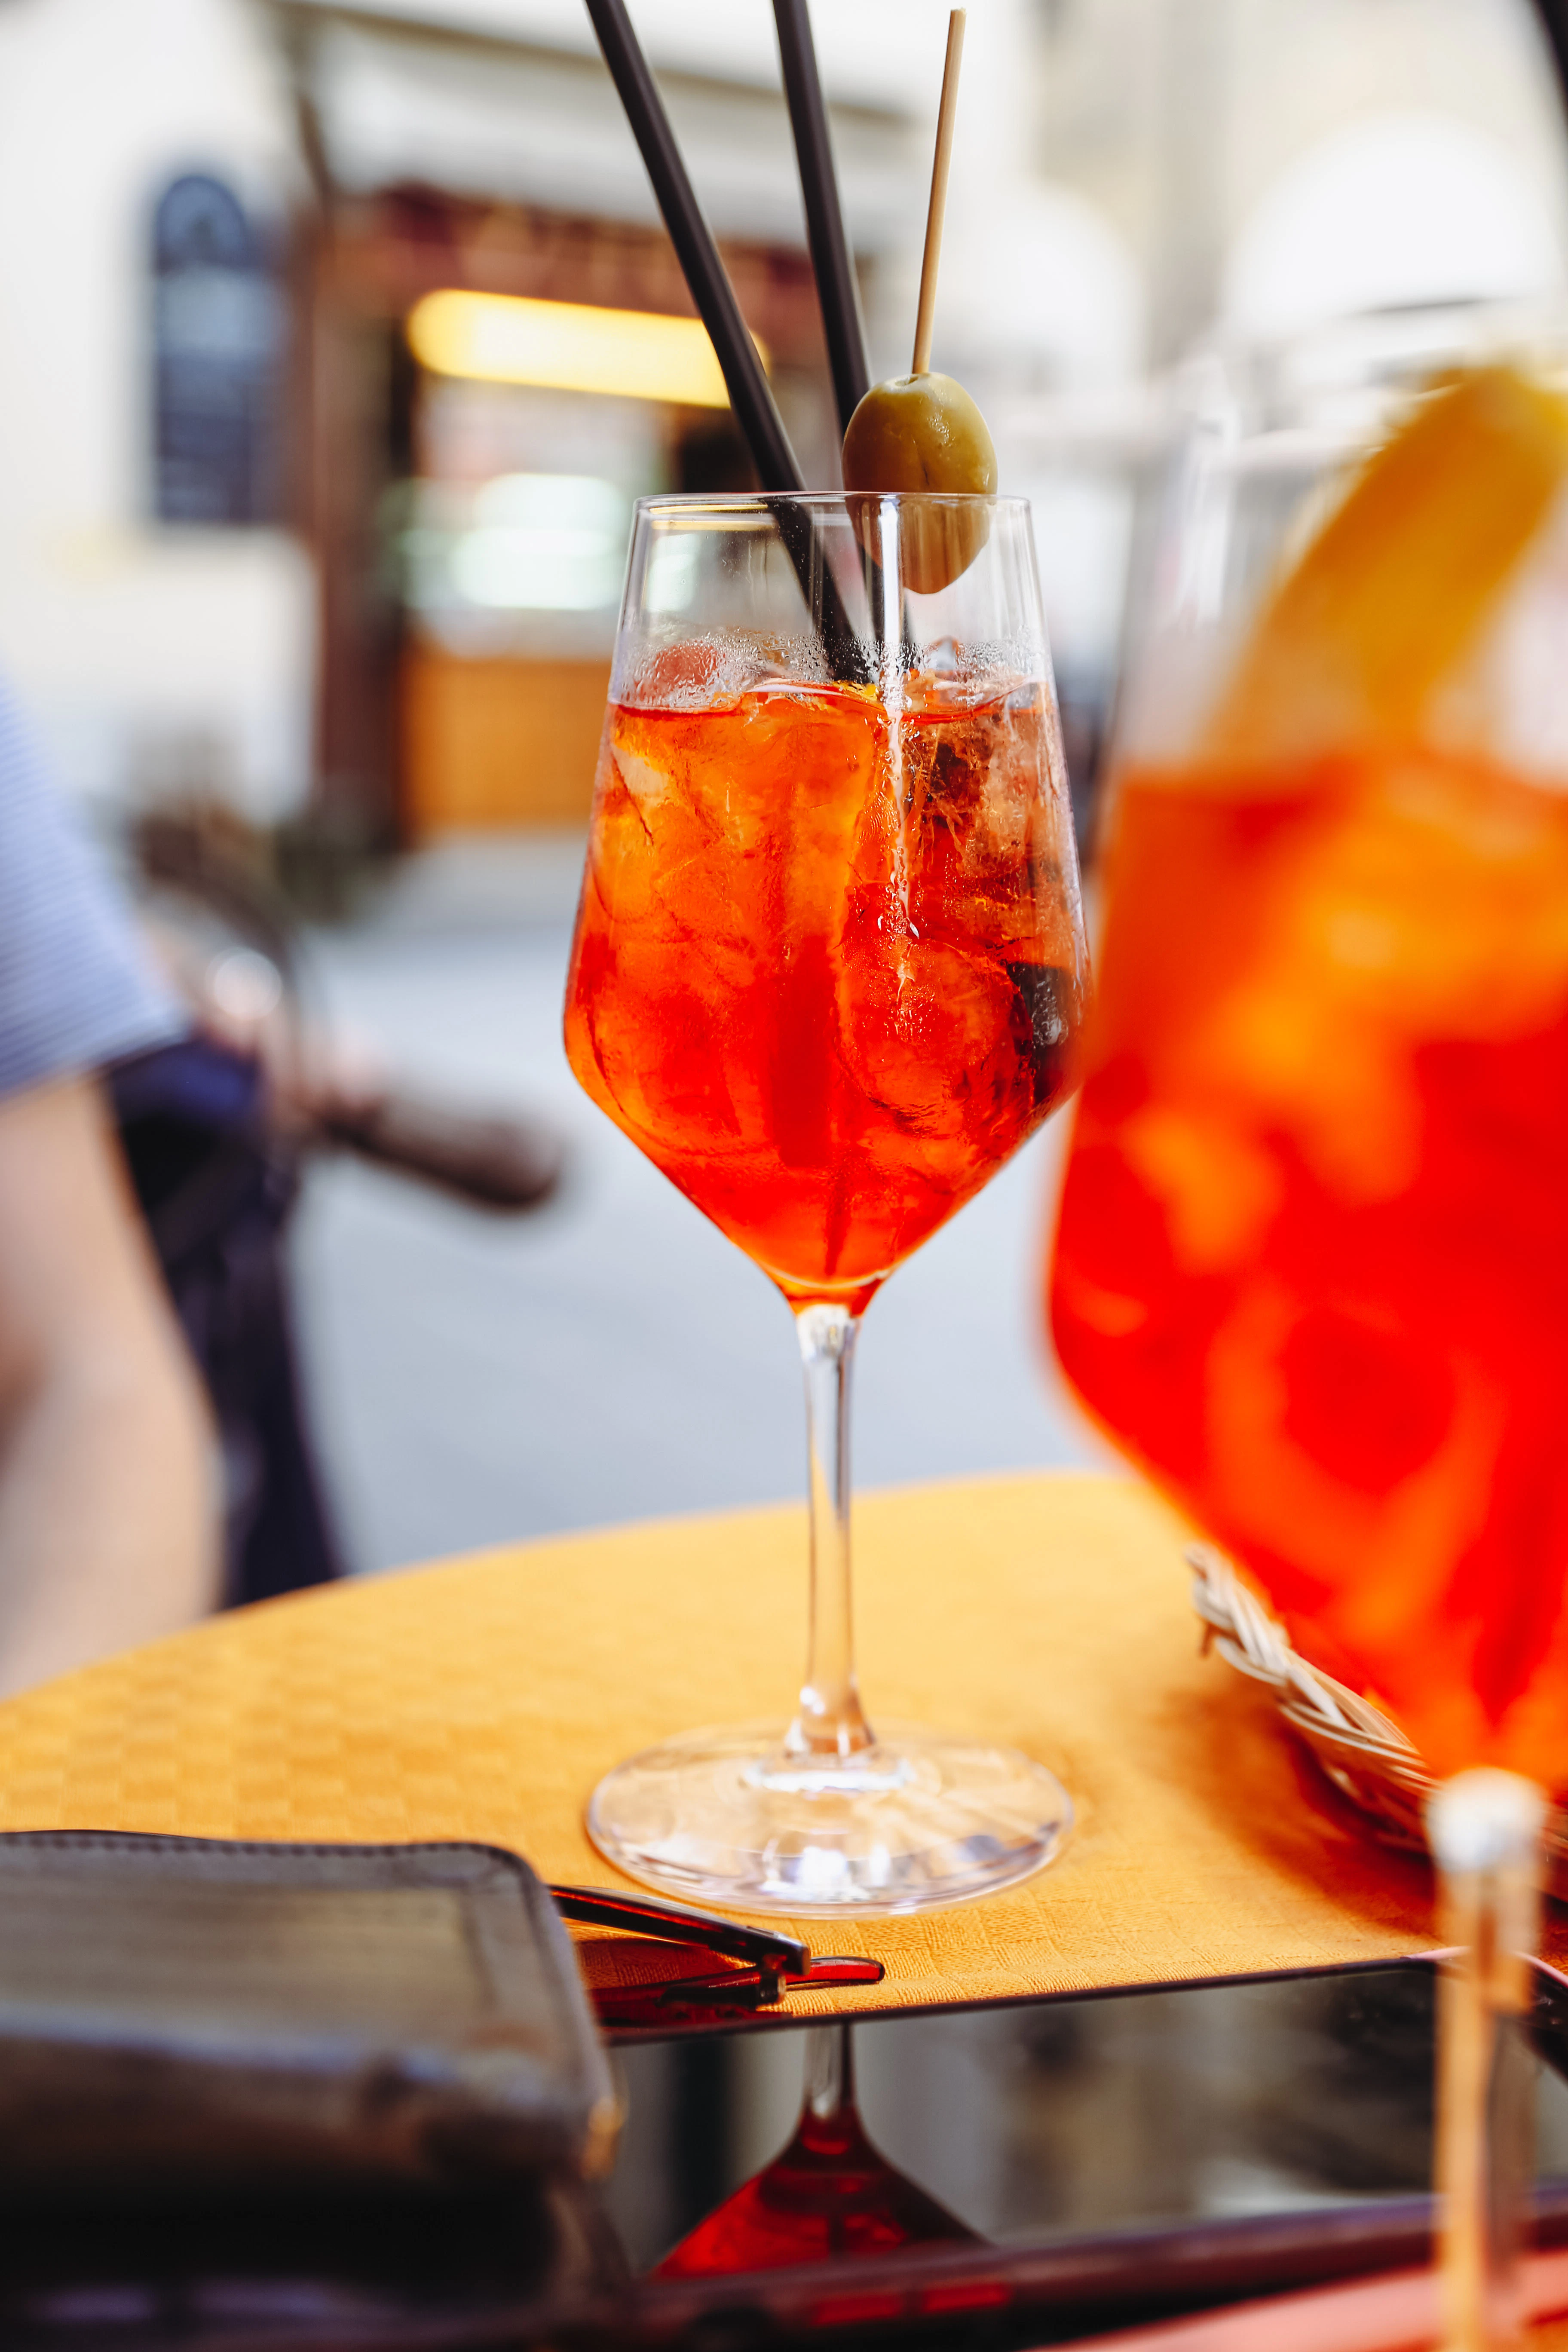 Two Aperol Spritz are on a table.